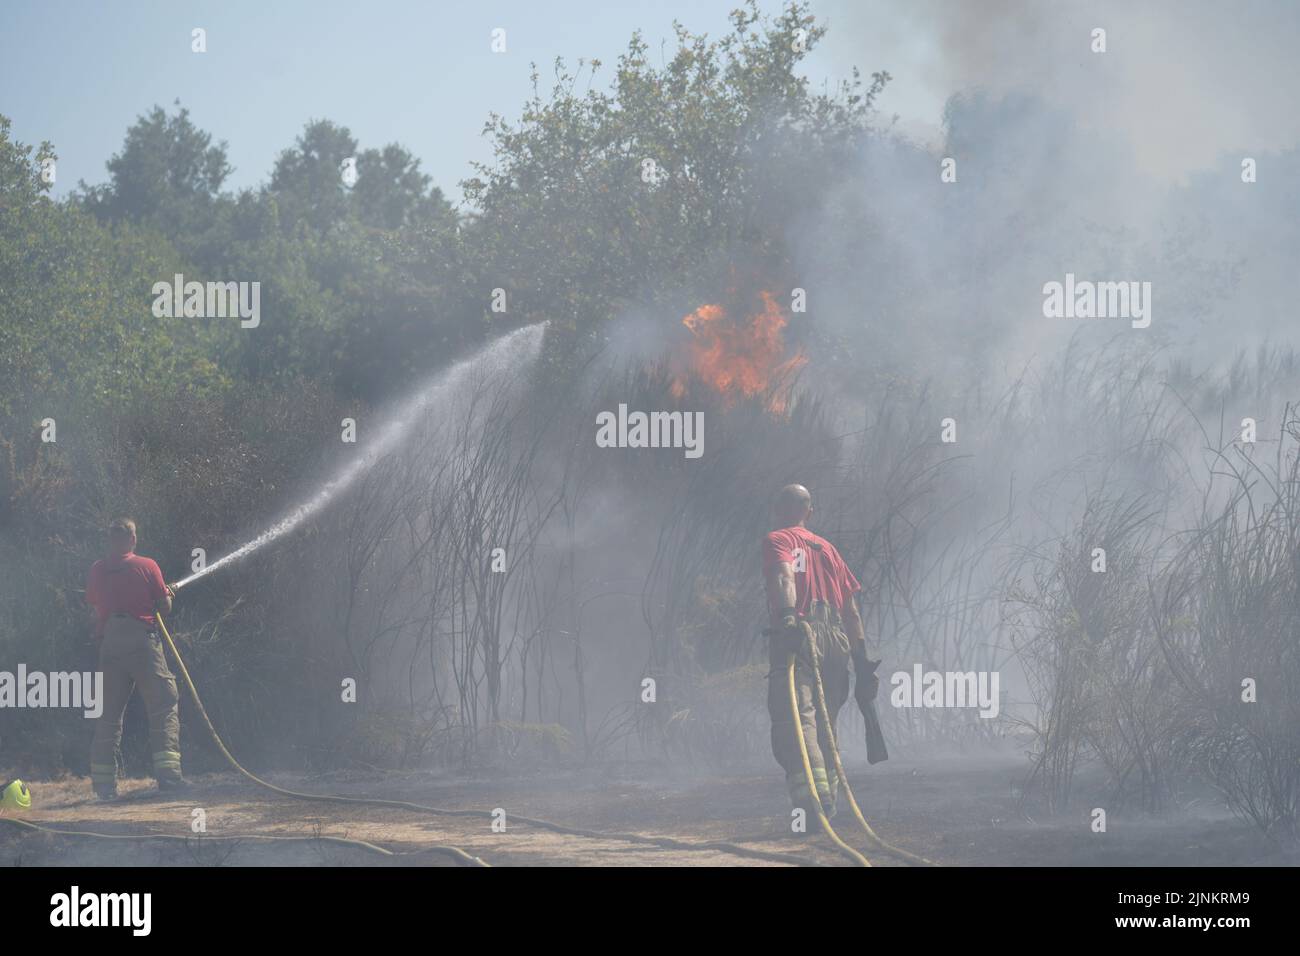 Firefighters battling flames from a grass fire on Leyton flats in east London, as a drought has been declared for parts of England following the driest summer for 50 years. Stock Photo